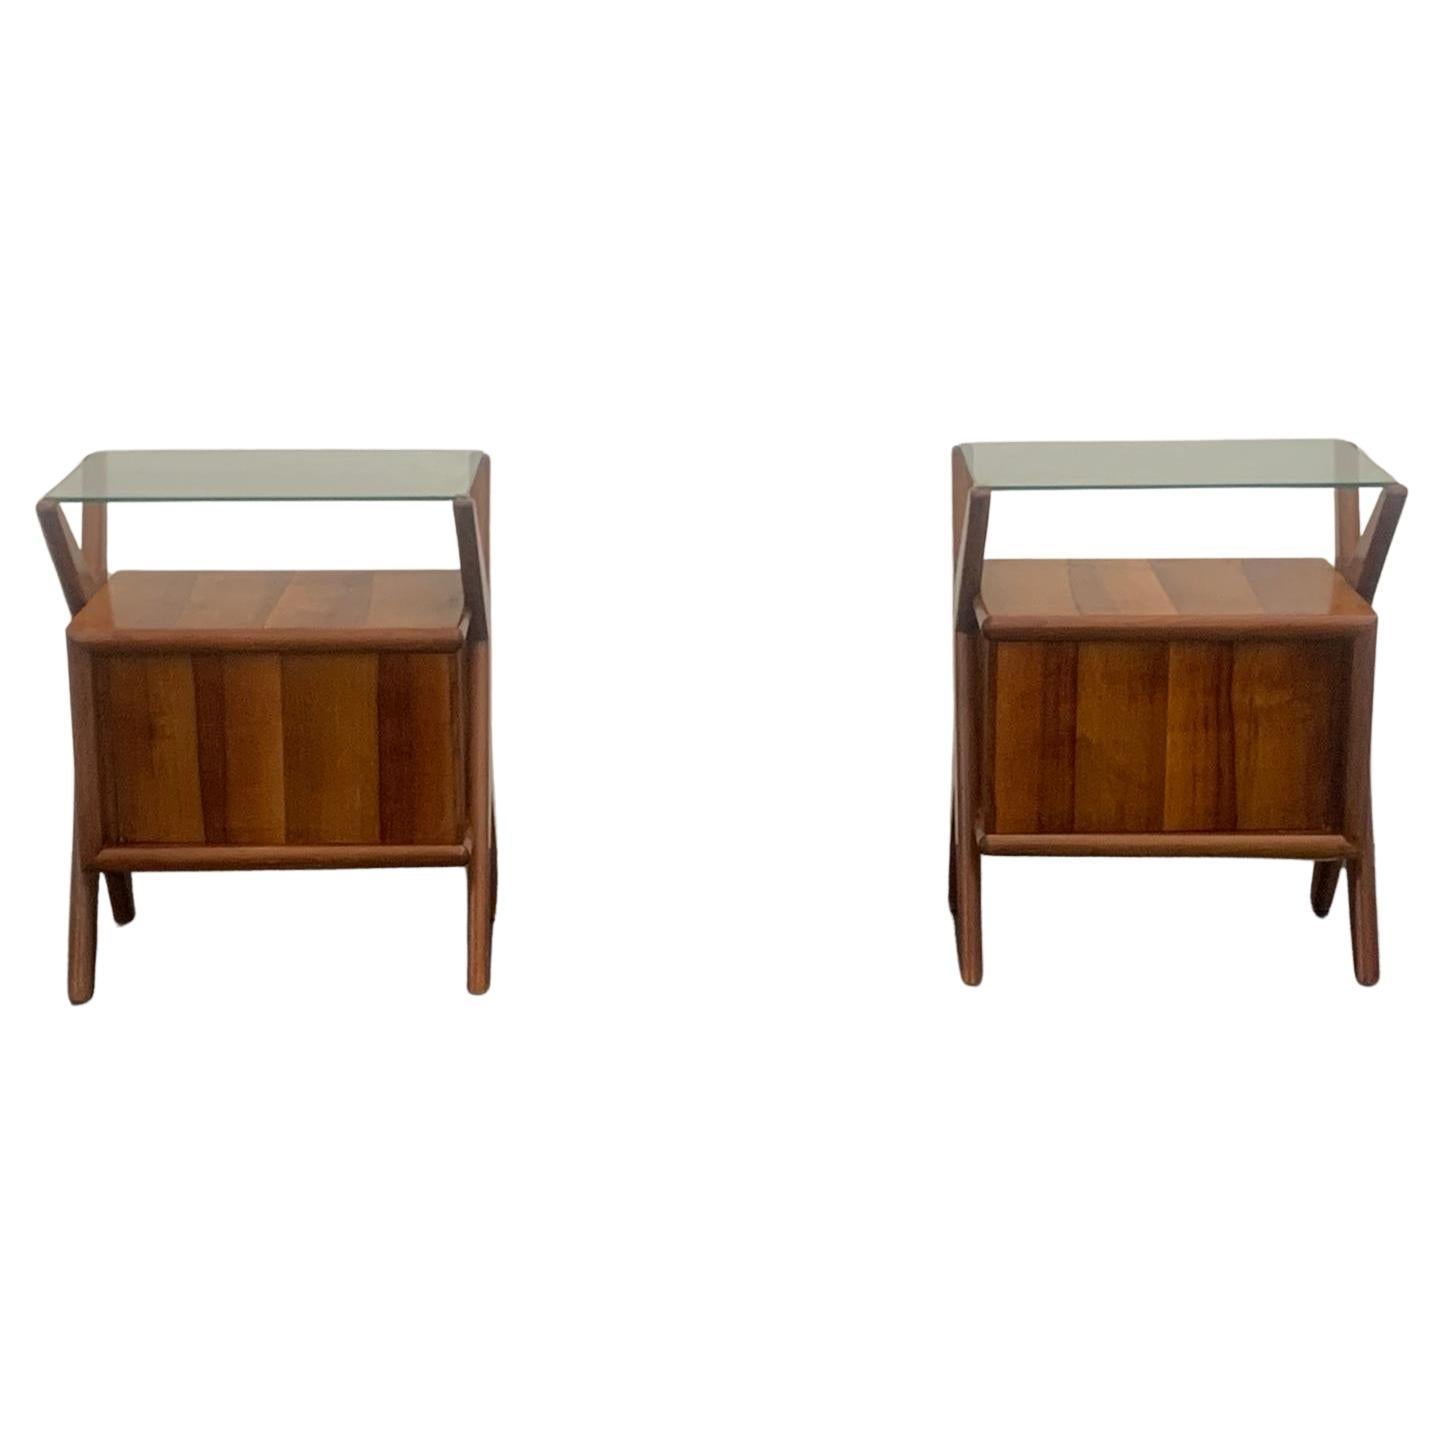 Bedside Tables in Rosewood with Generous Glass Topб Set of 2